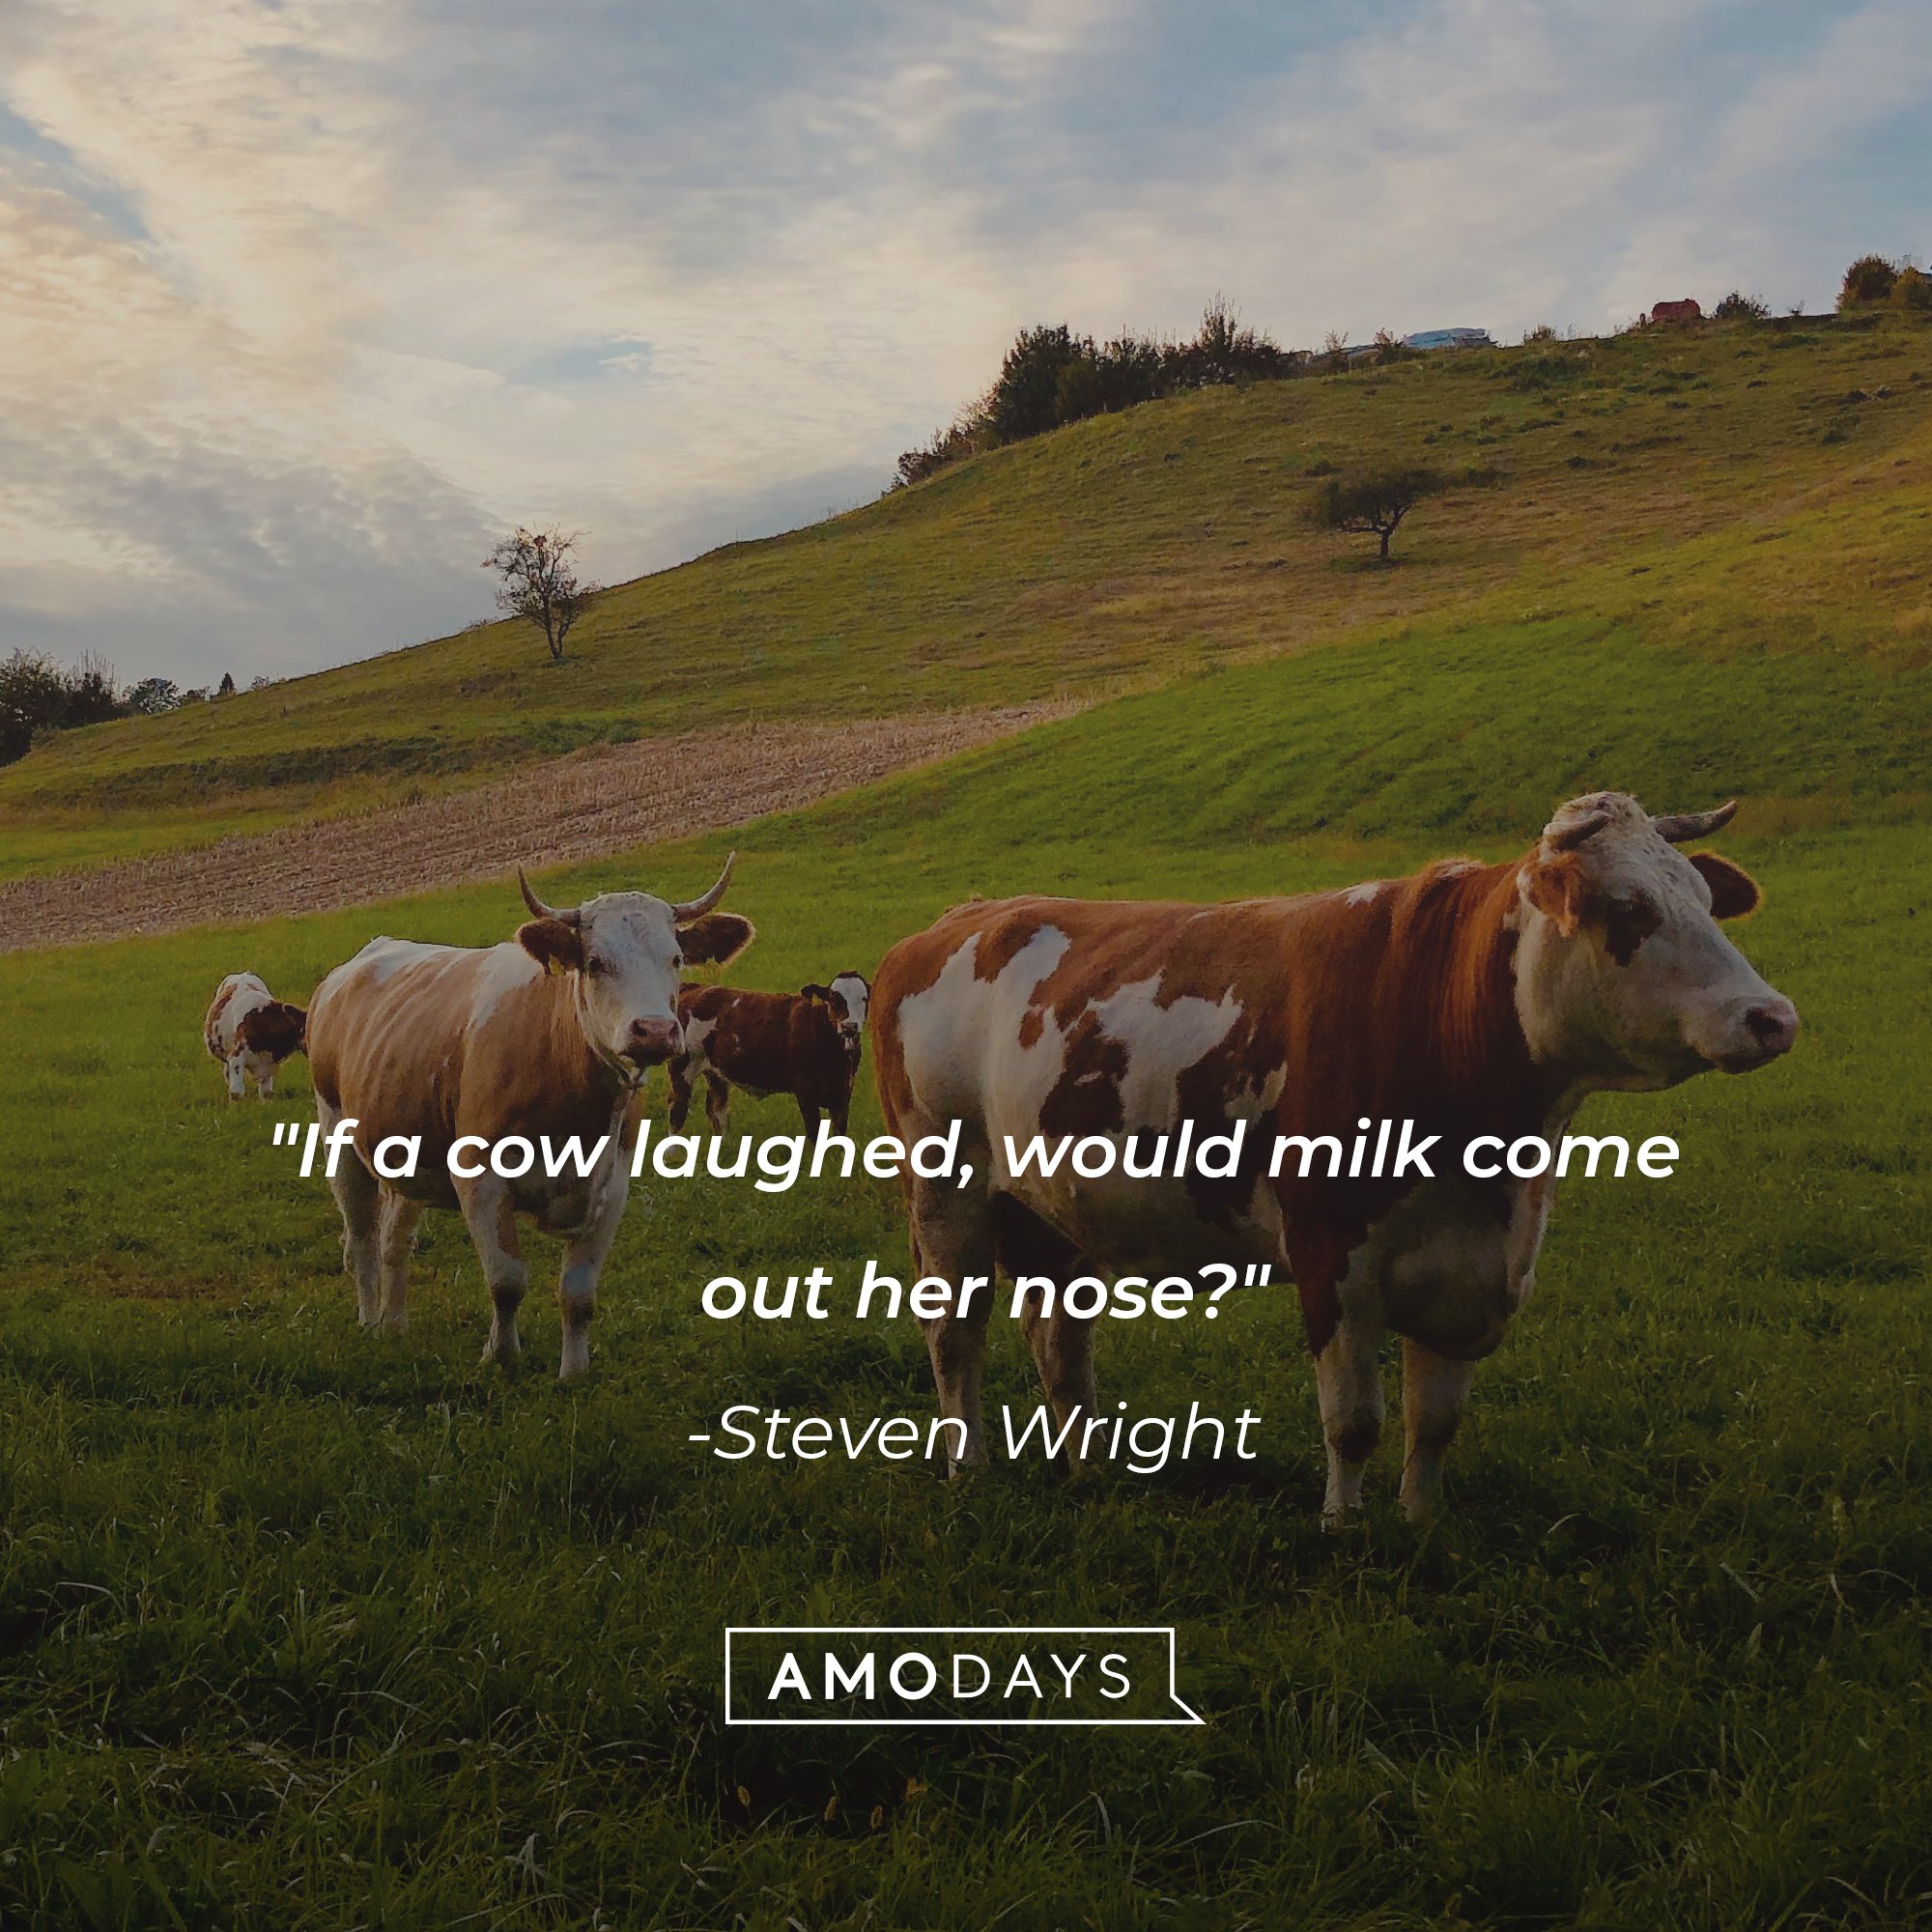 Steven Wright’s quote: "If a cow laughed, would milk come out her nose?" | Image: AmoDays